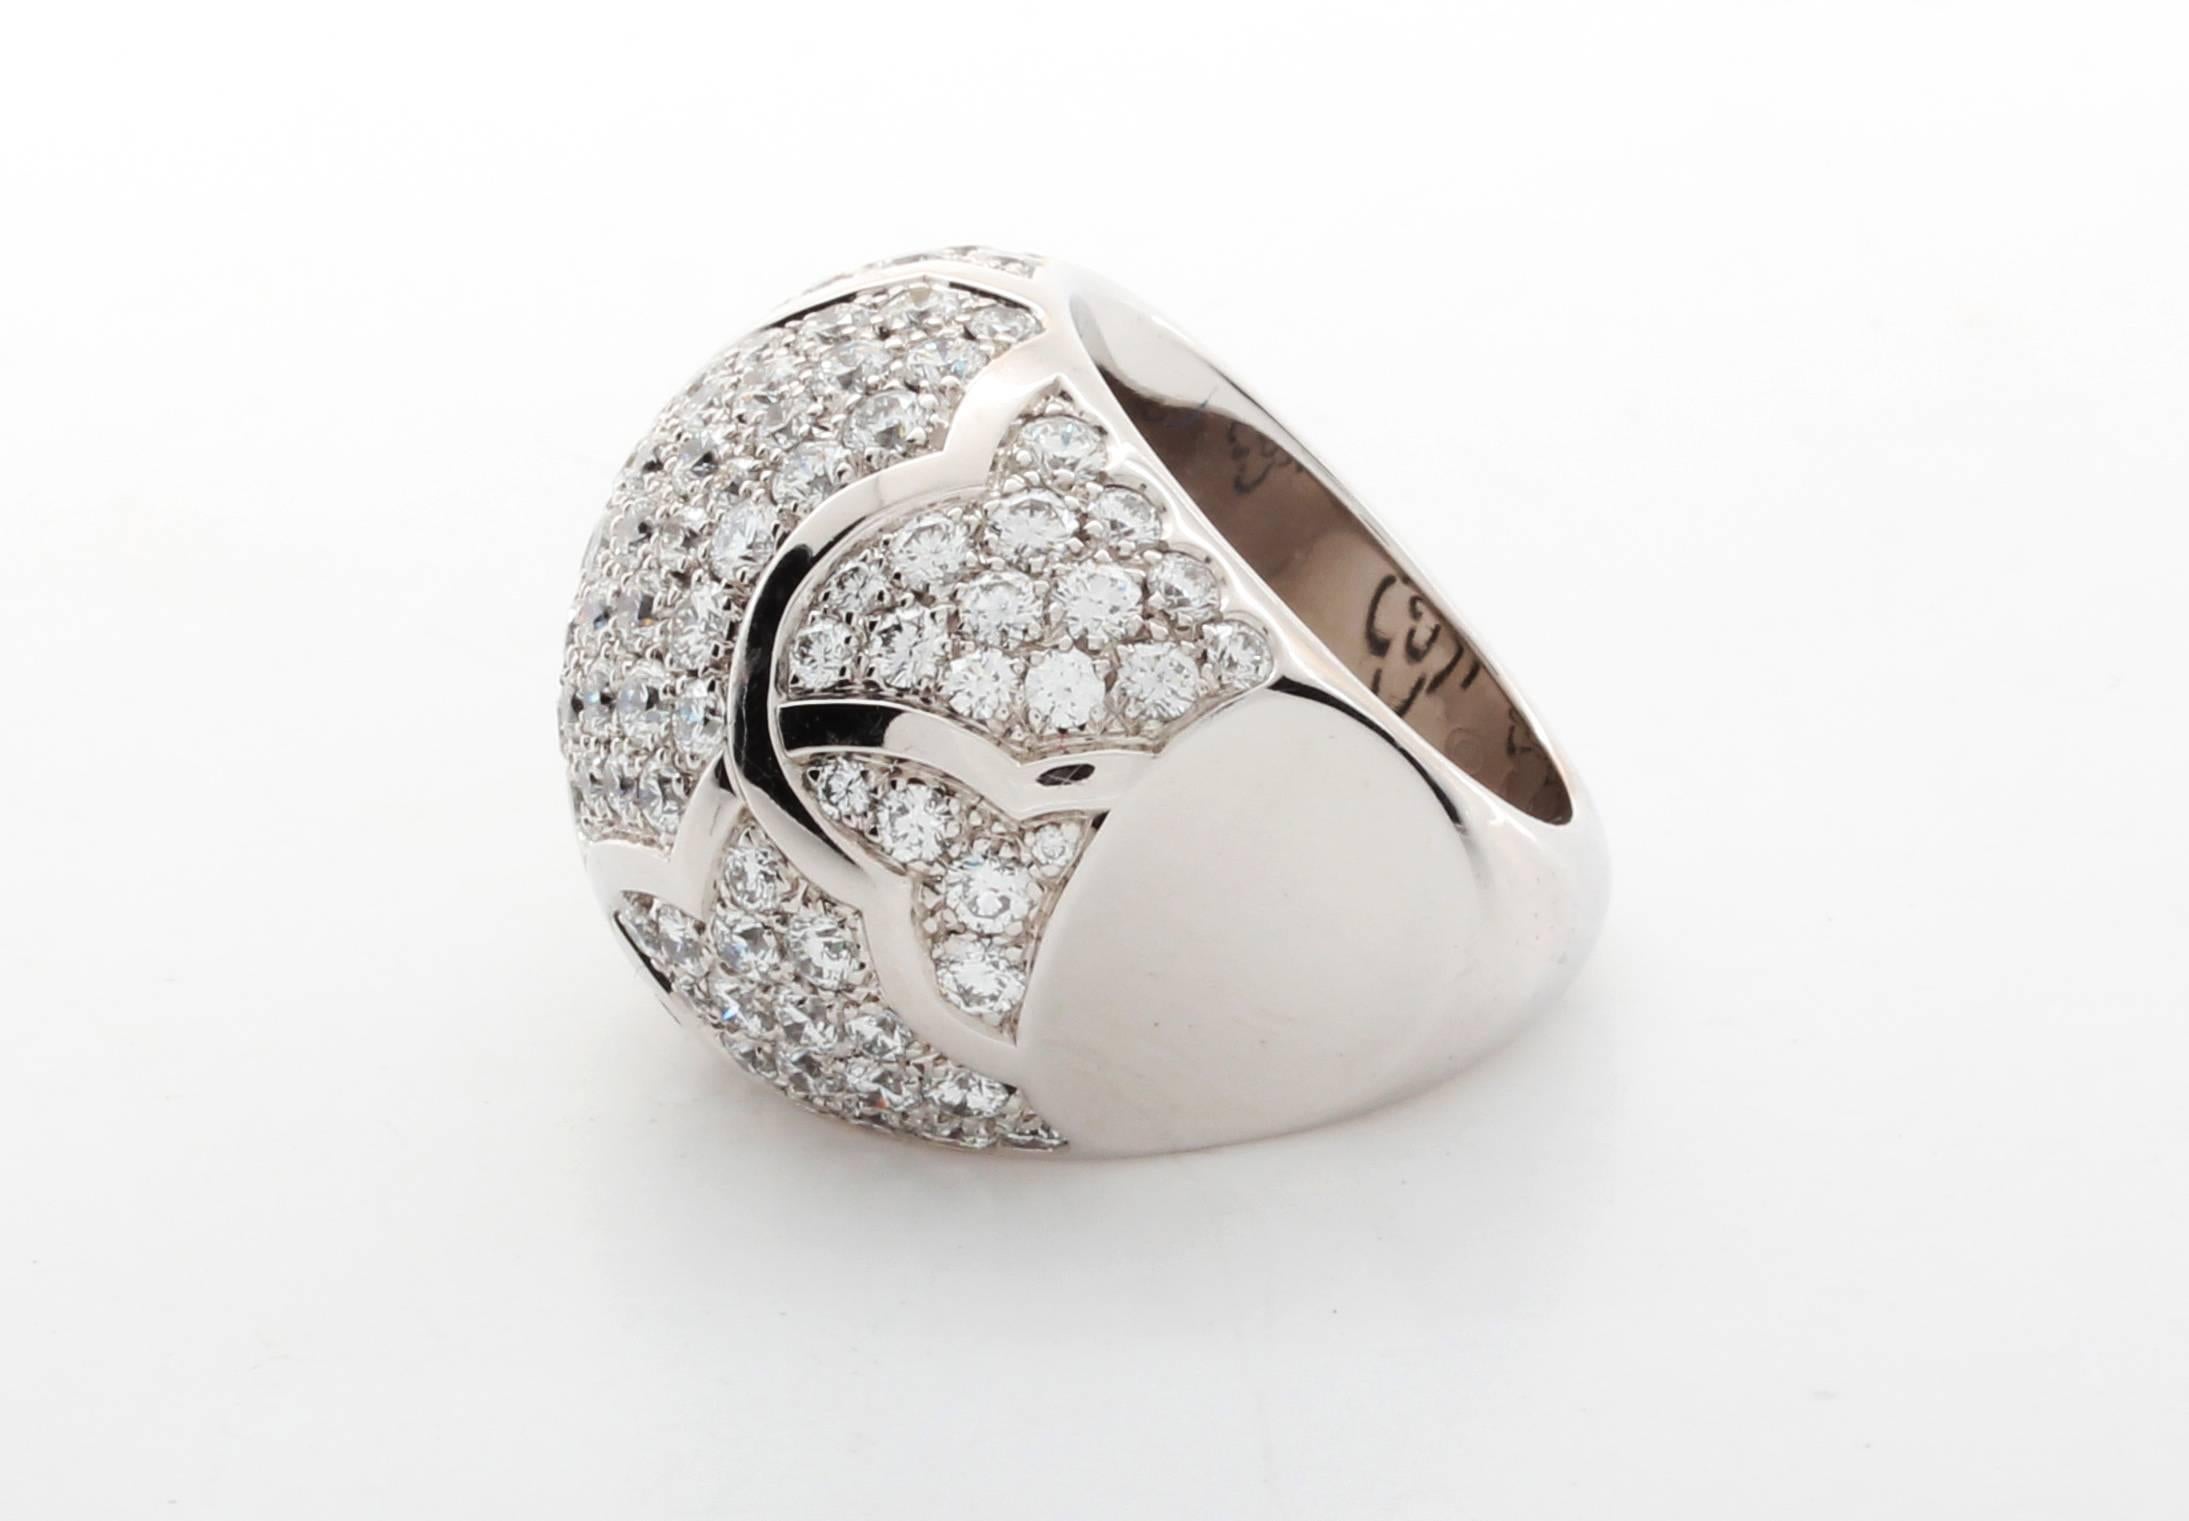 Chanel Diamond Pave Gold Dome Ring In Excellent Condition For Sale In Sunny Isles Beach, FL